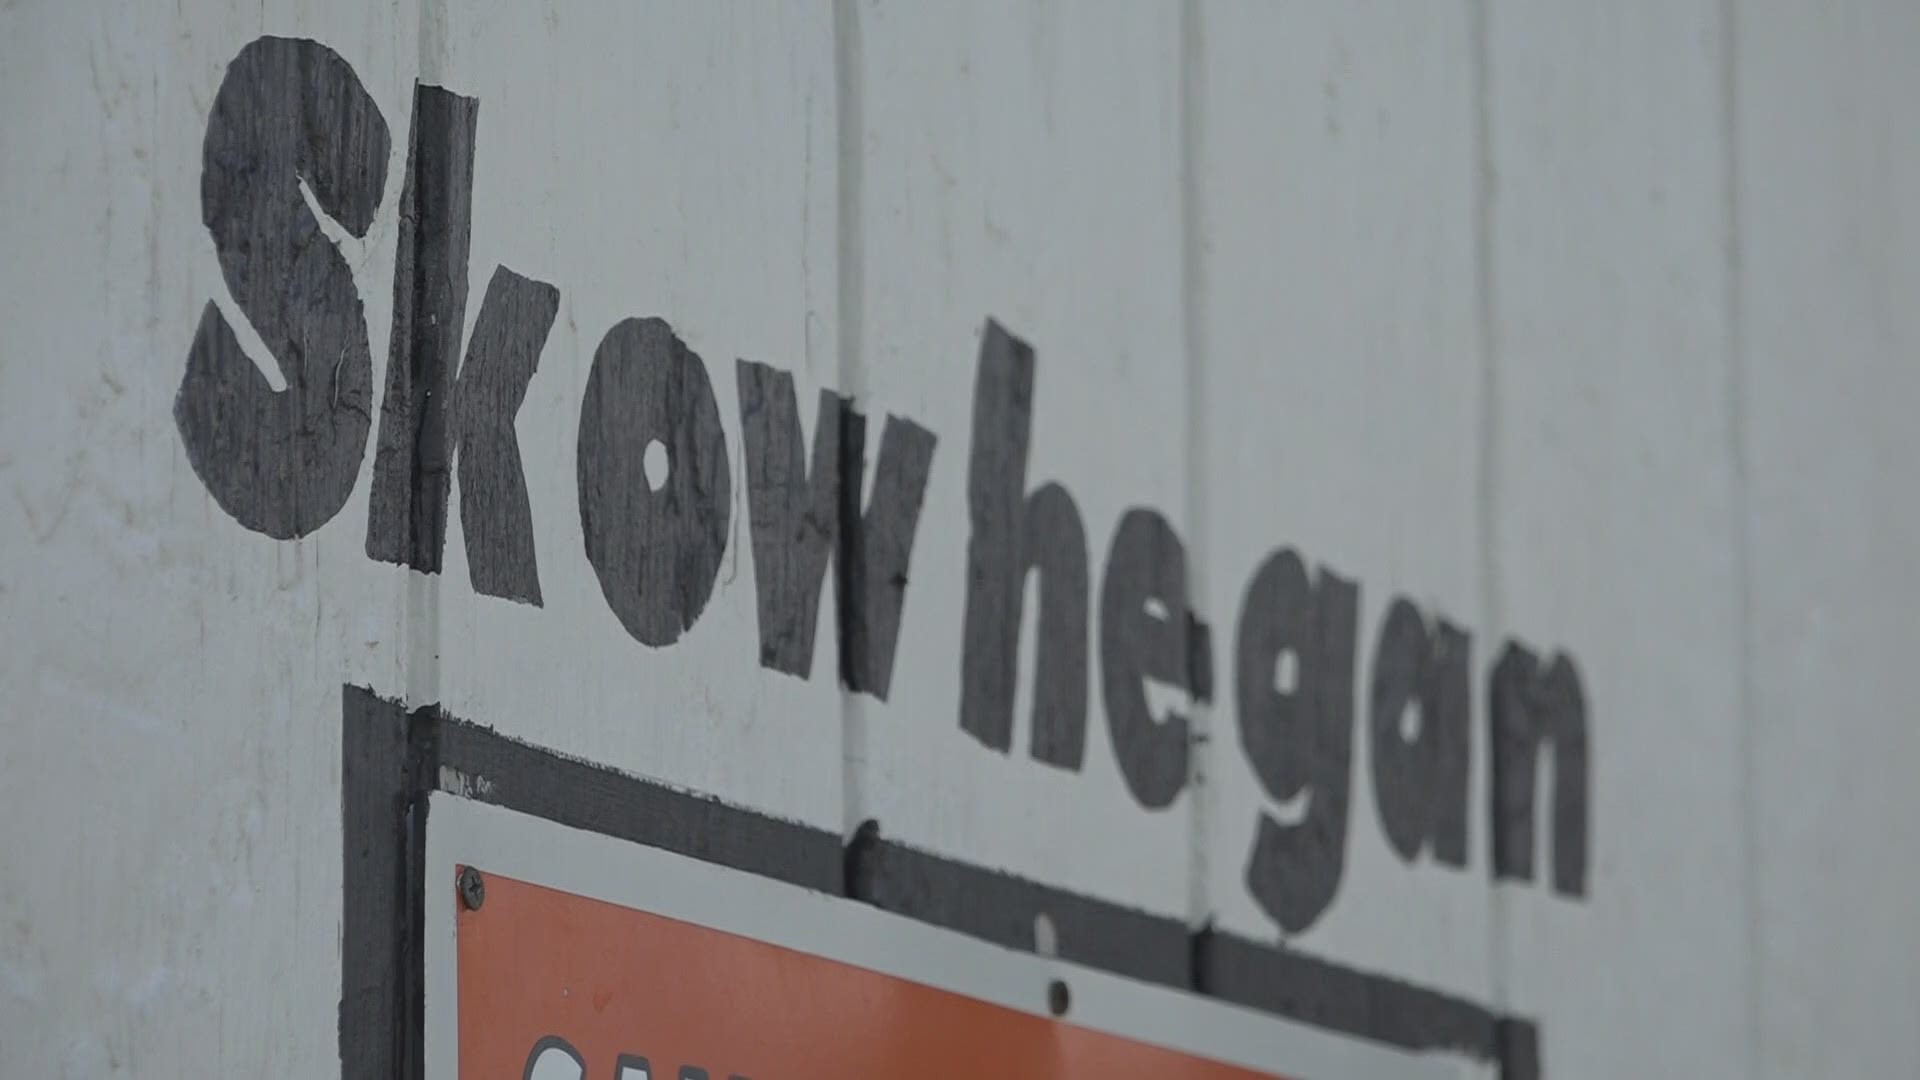 The new Skowhegan mascot is expected to be named Thursday, Oct. 8, 2020